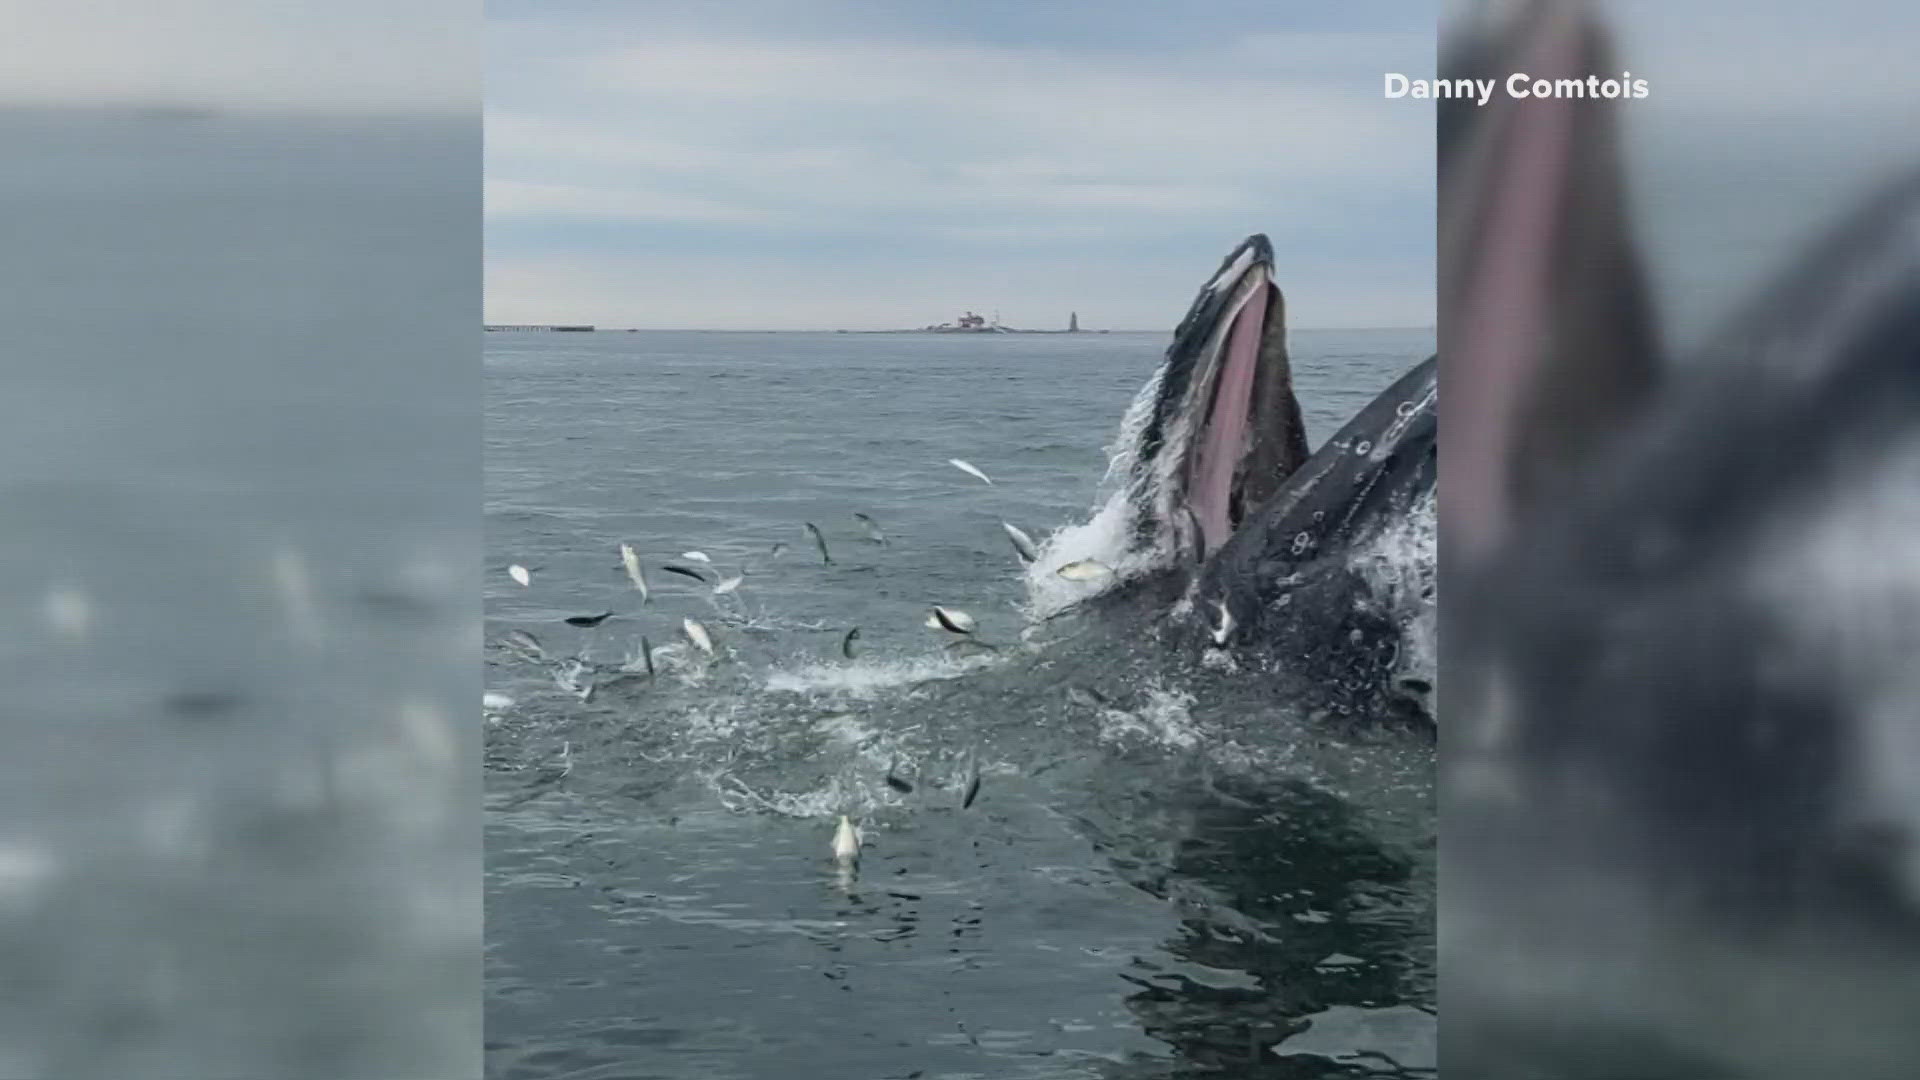 The whale has been lingering in close shore for about three days, and it seems everyone is trying to catch a glimpse of the rare sighting.